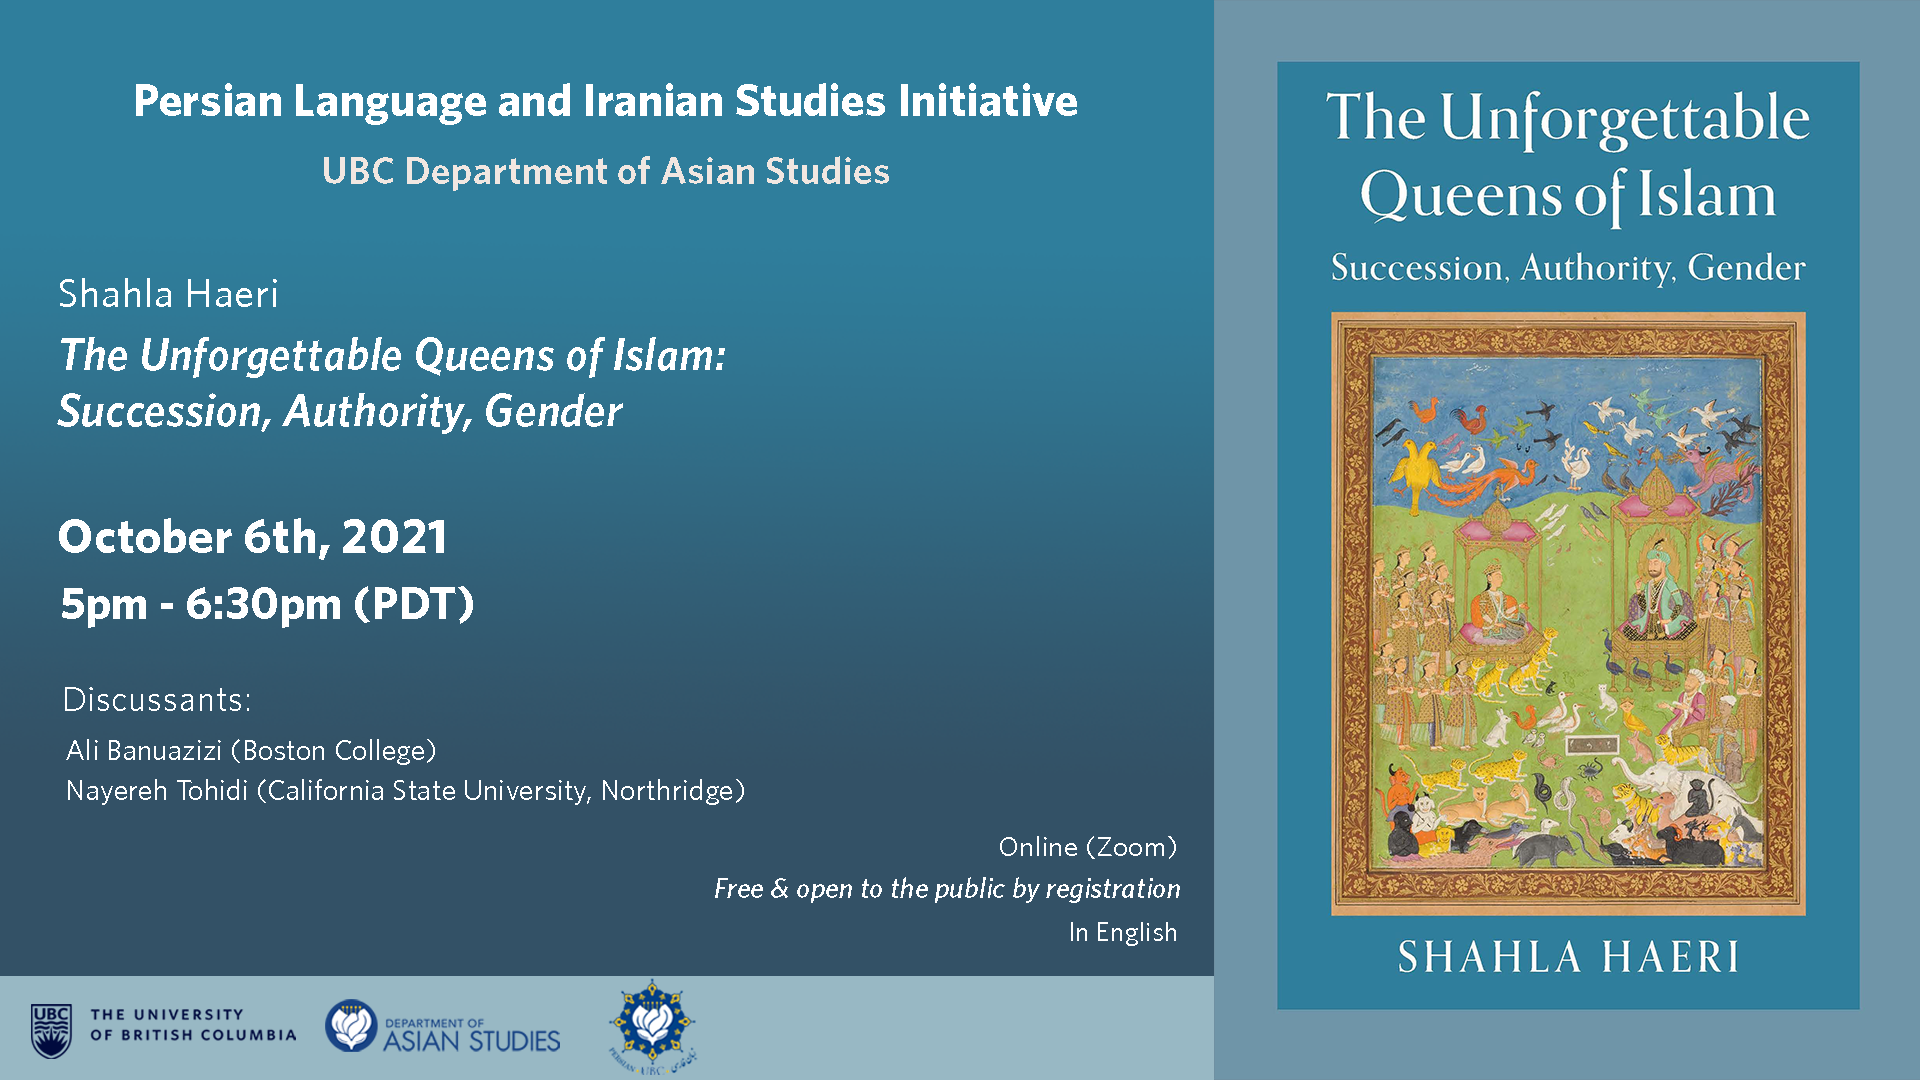 Virtual Book Talk with Shahla Haeri: The Unforgettable Queens of Islam: Succession, Authority, Gender